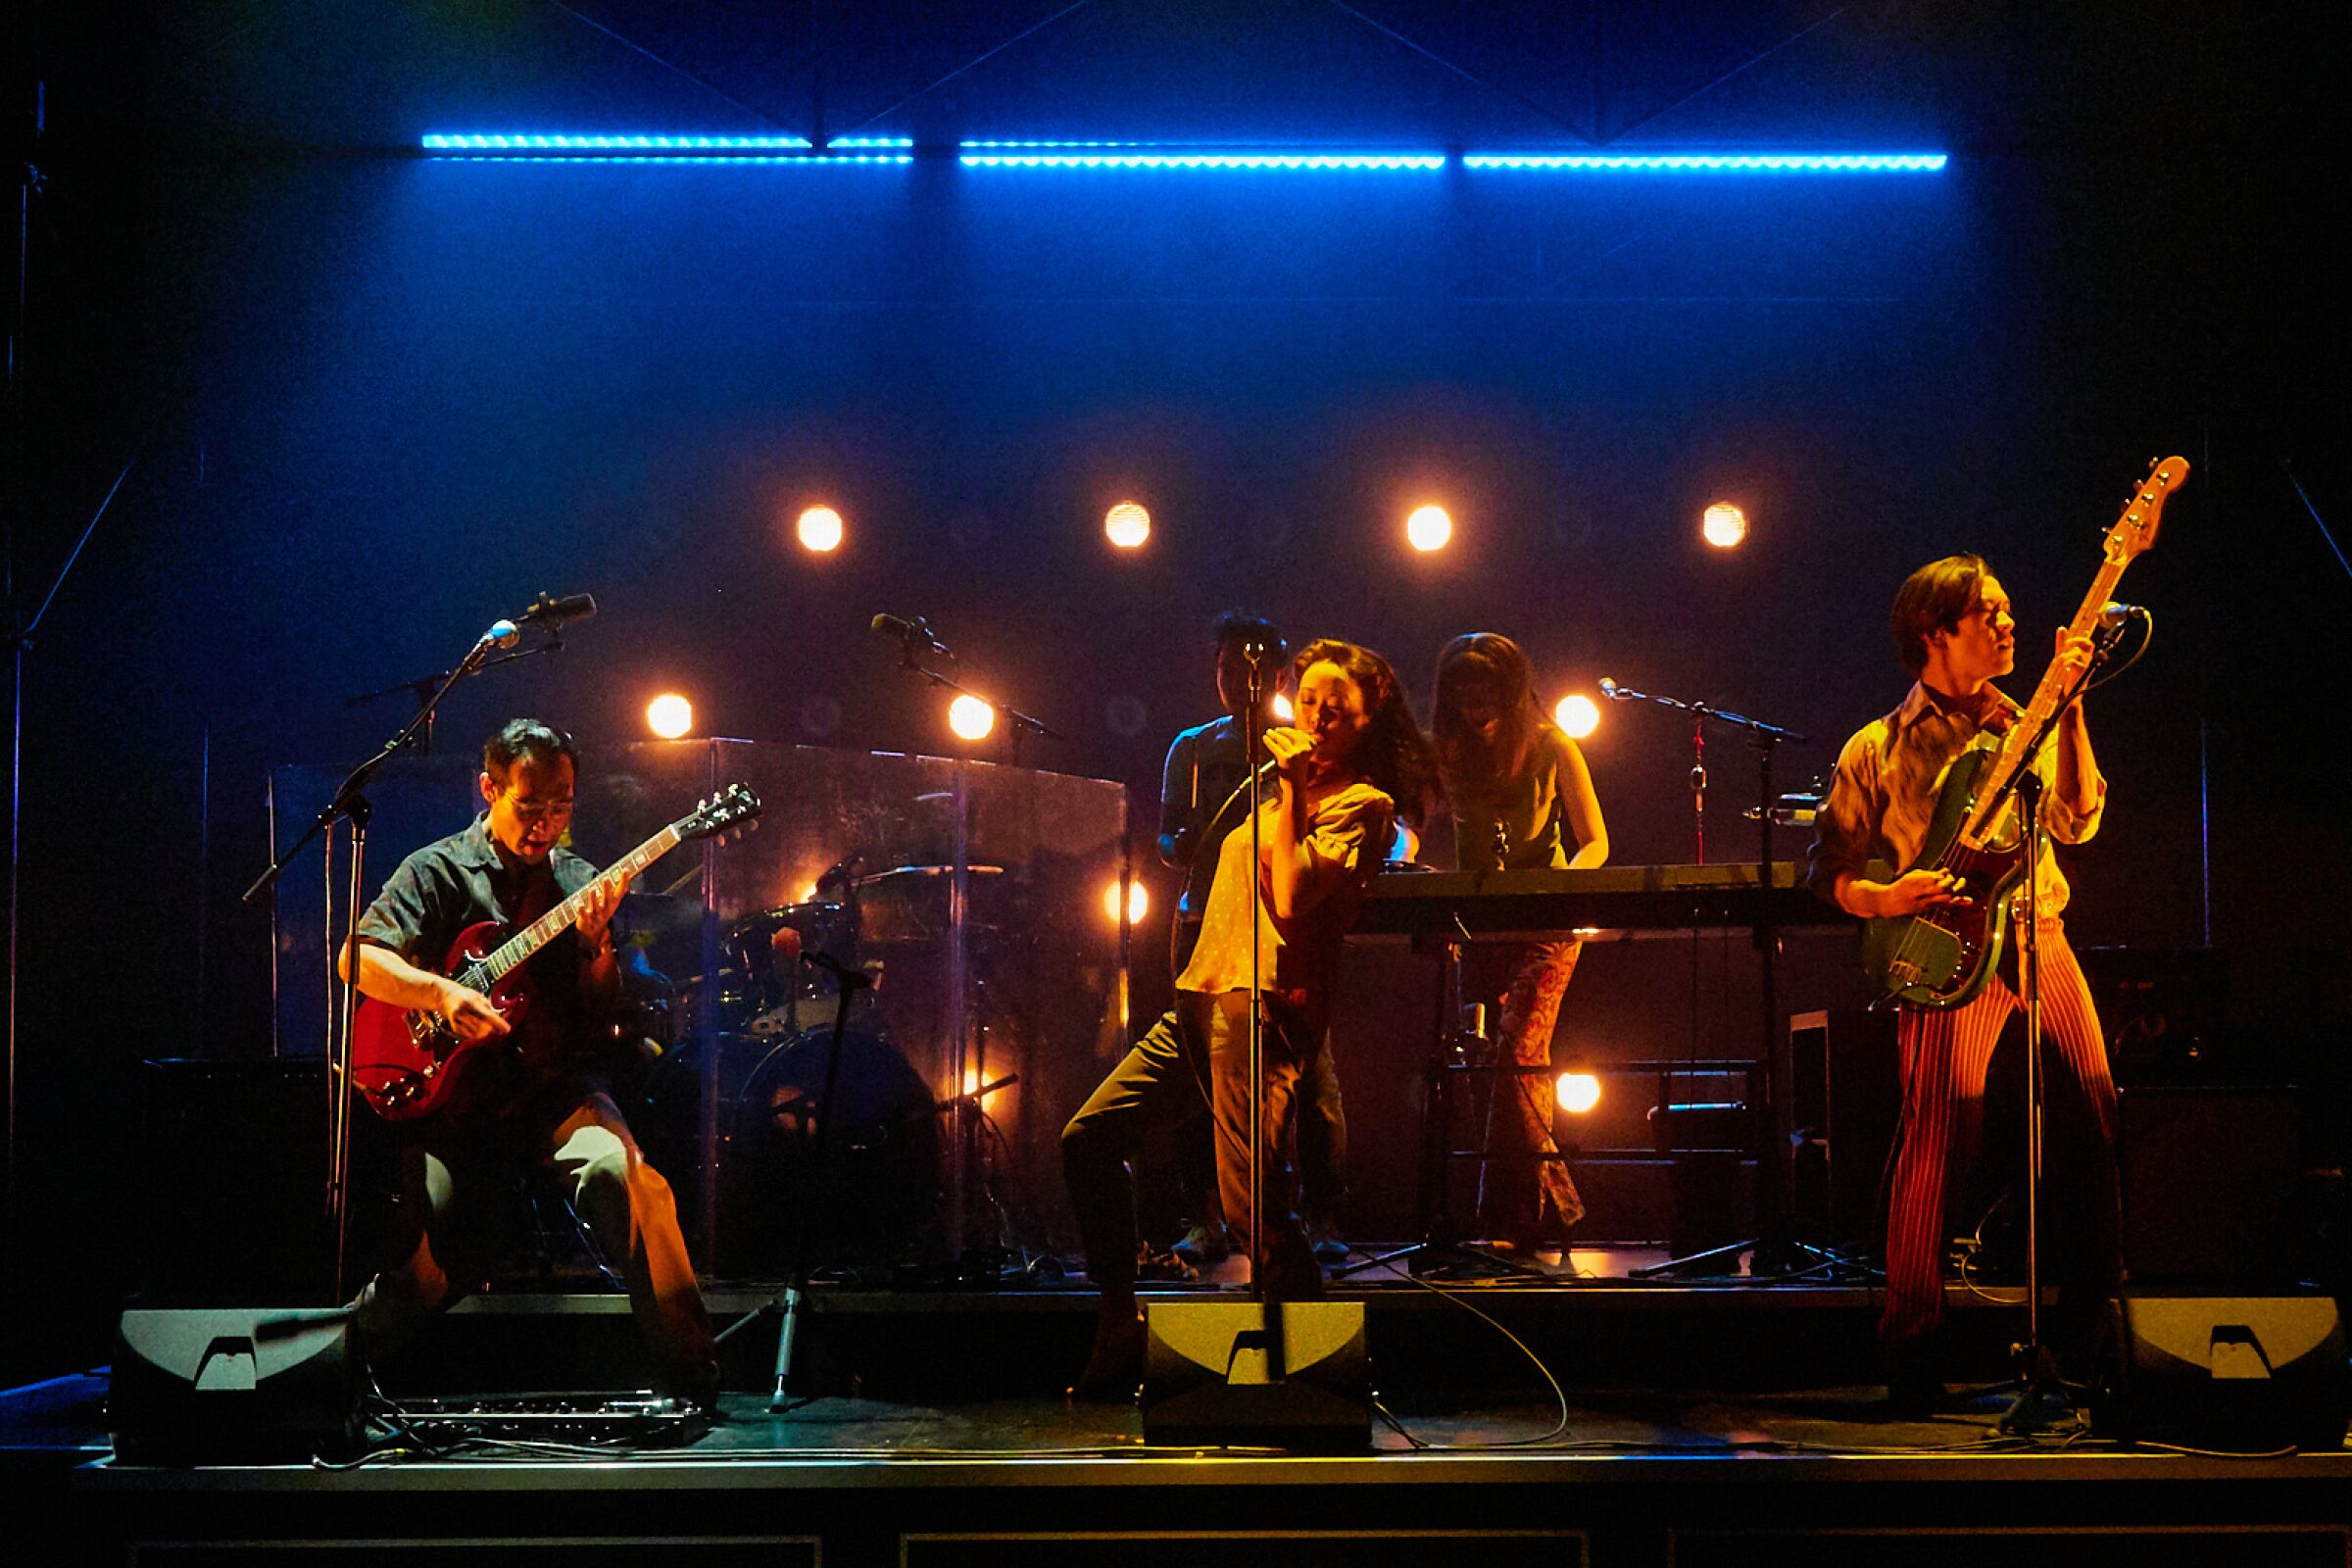 "Cambodian Rock Band" brought the playwriting sensation and University of California San Diego grad back to town for a powerful La Jolla Playhouse staging of the music-propelled piece.